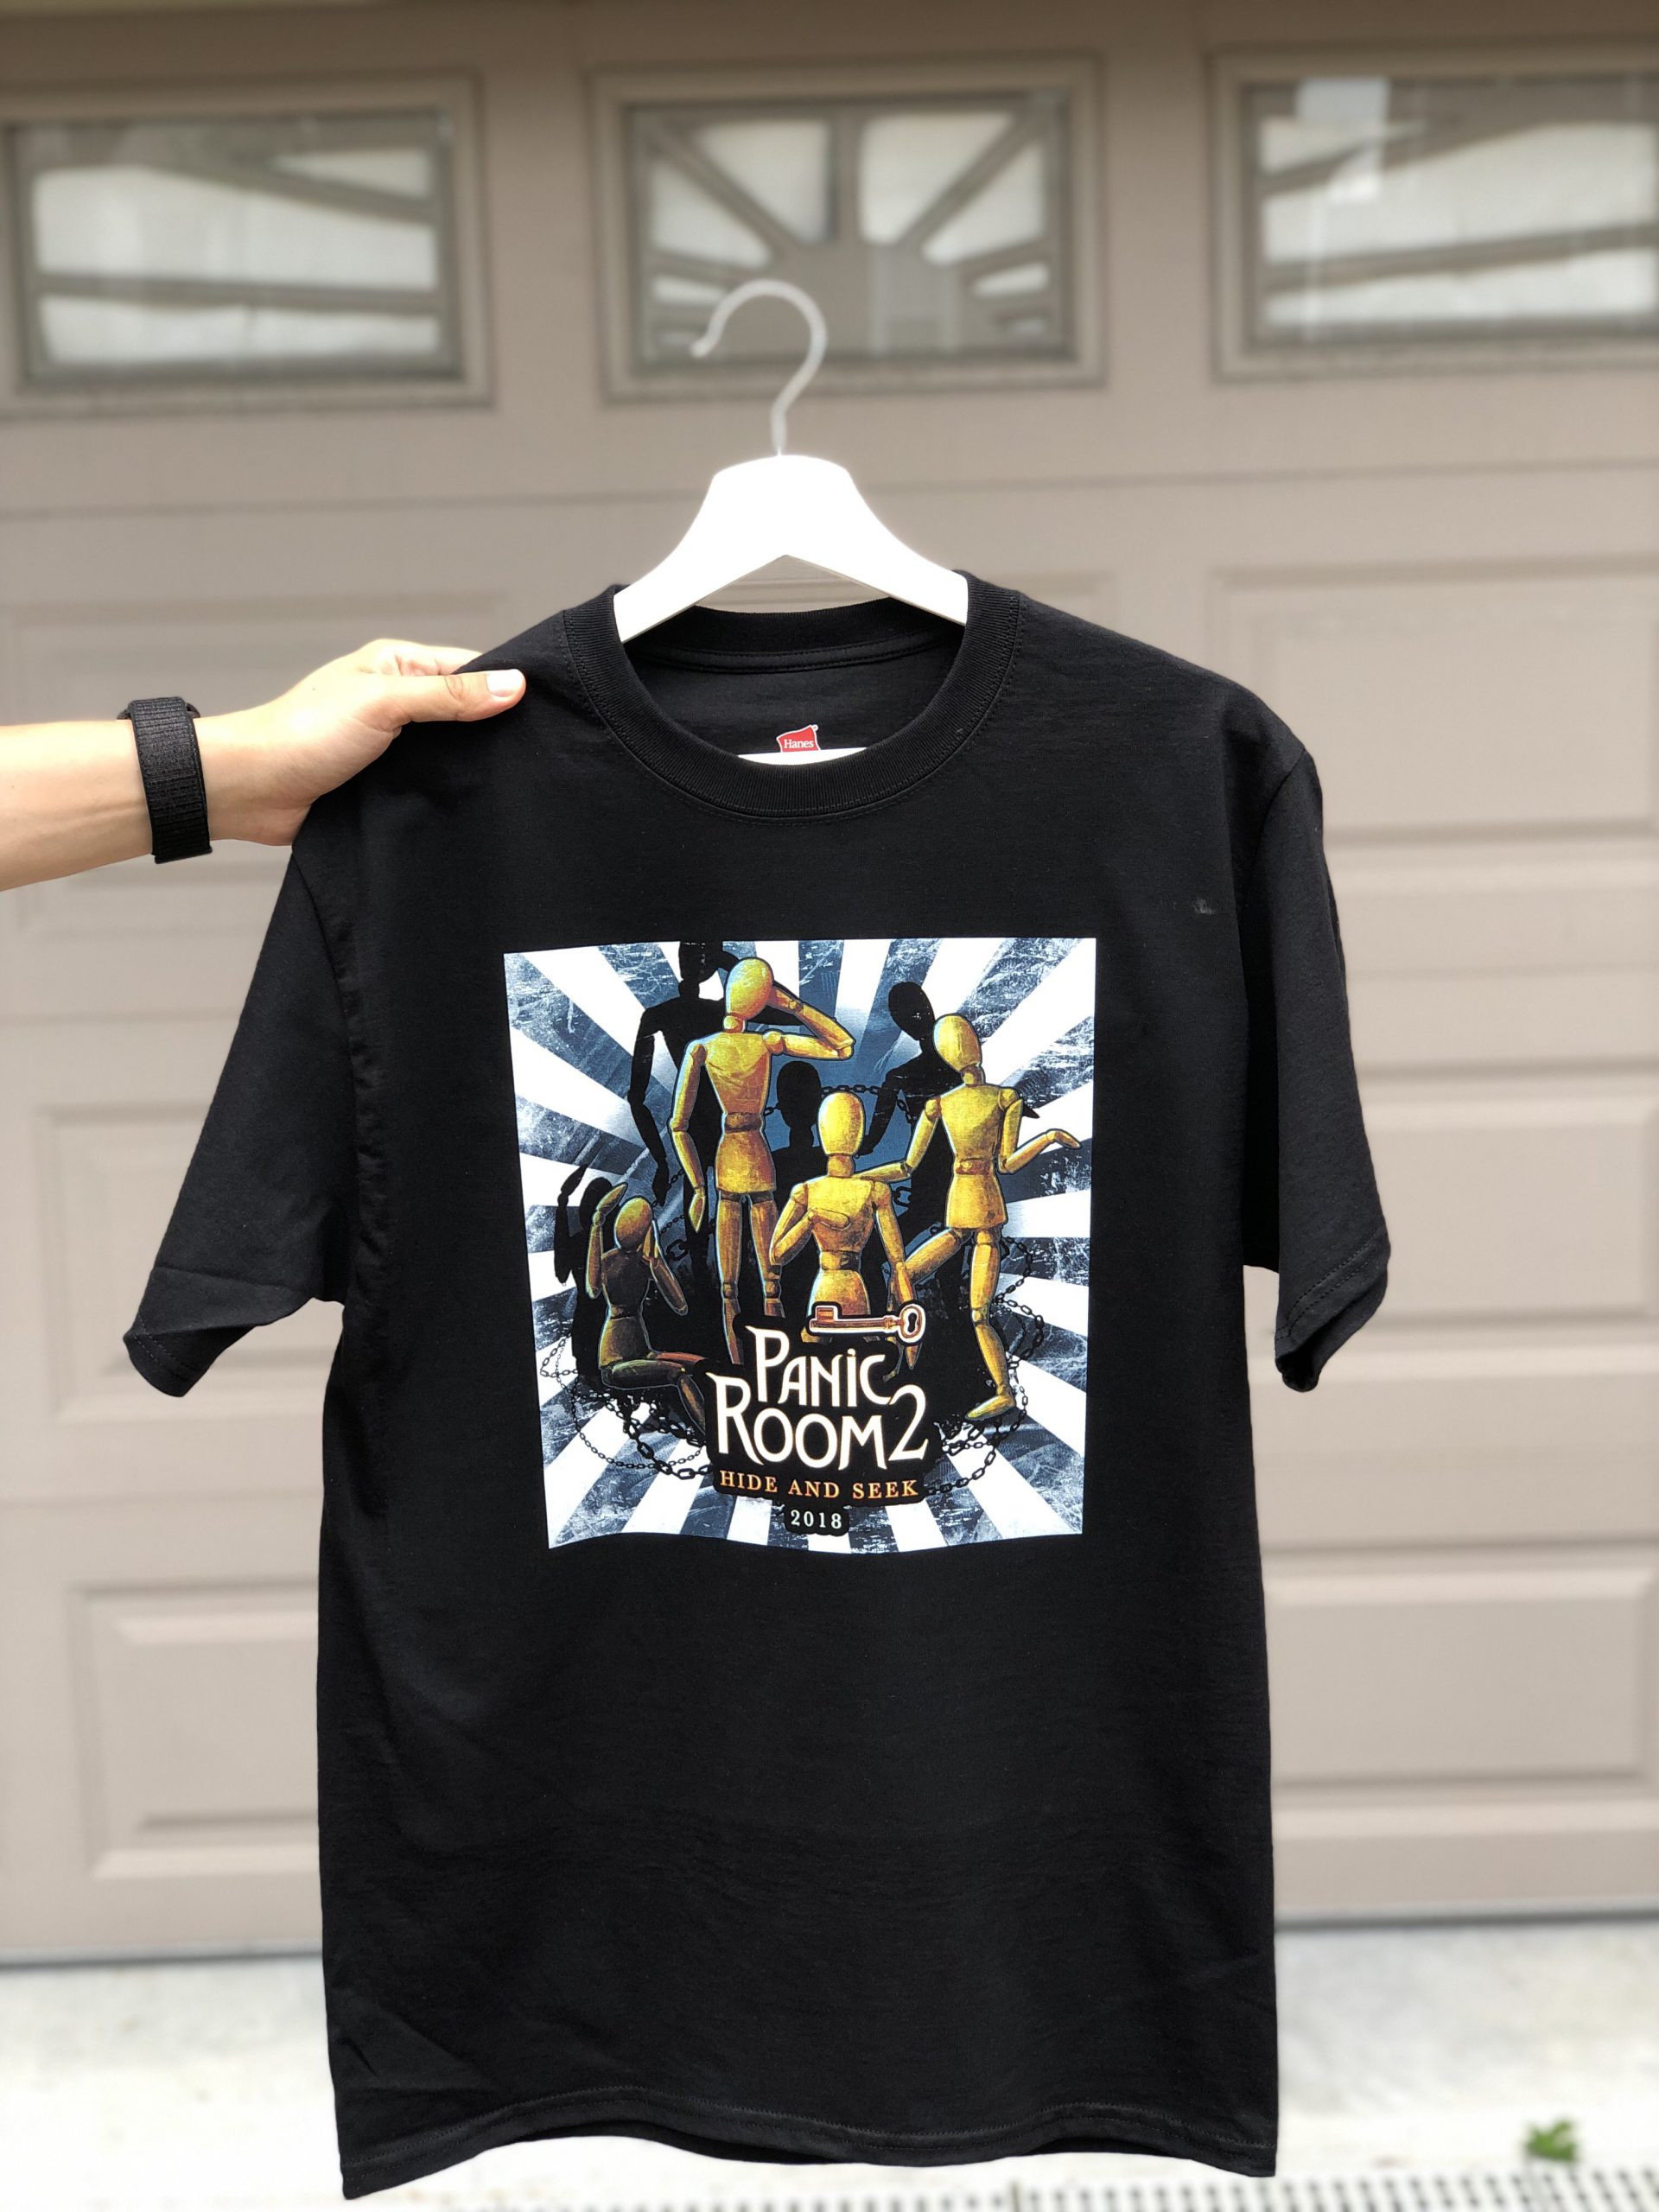 High Quality Printed T-shirt in NYC